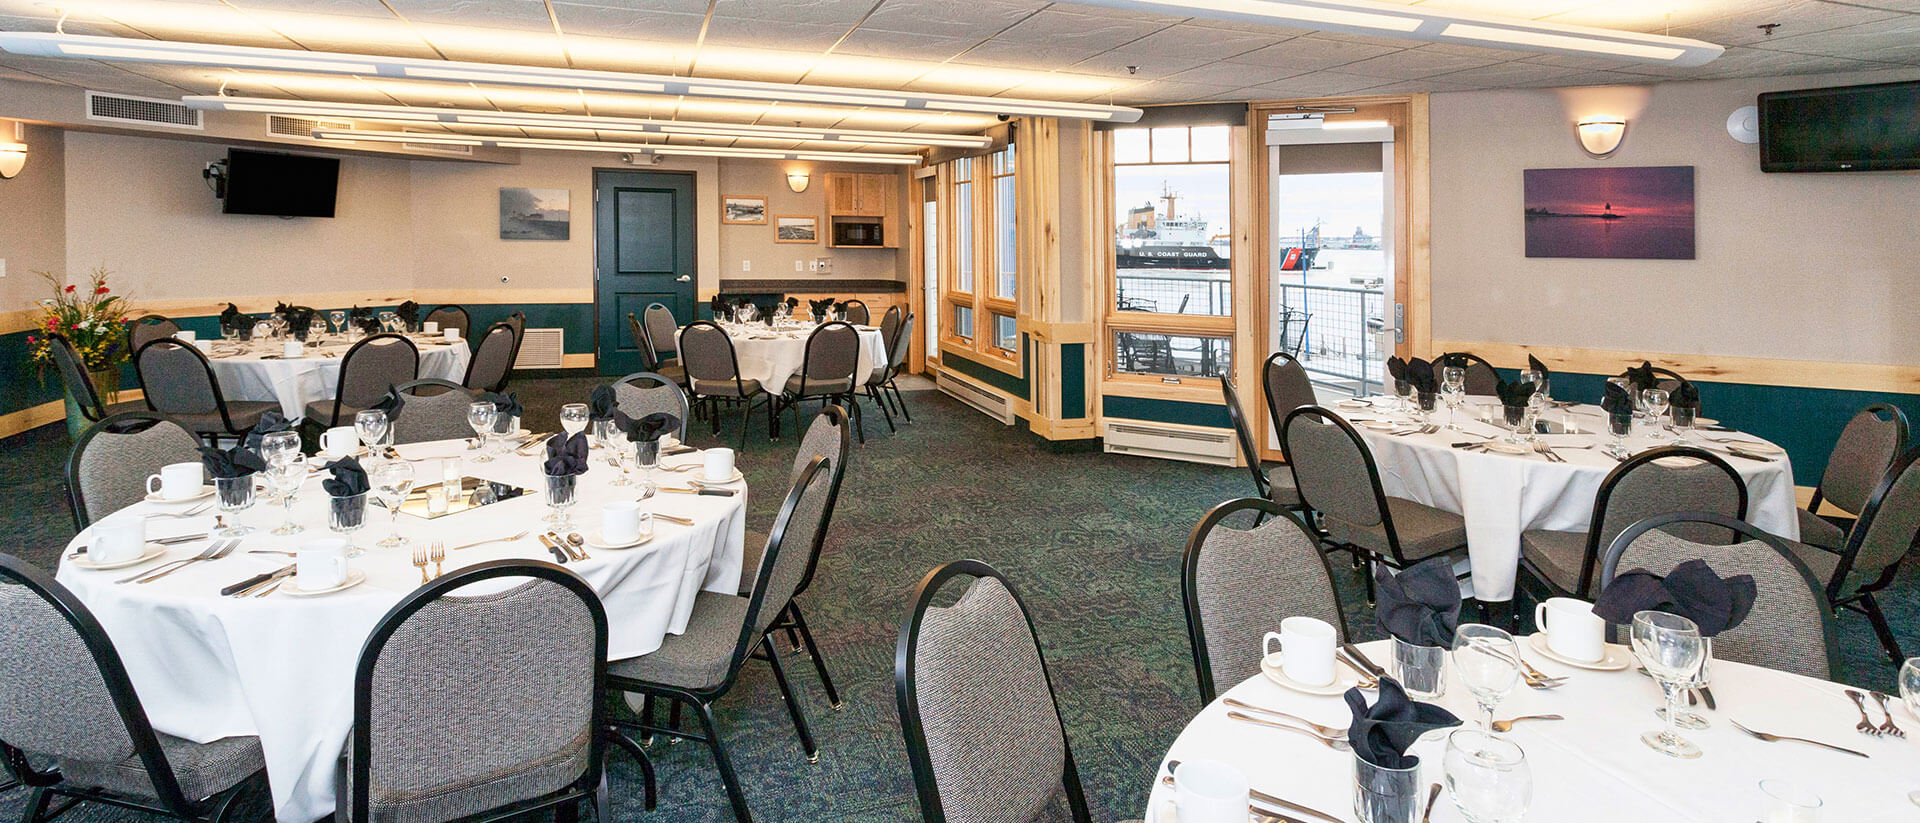 tables and chairs are well orderly place in the park point marina inn's meeting & banquet rooms 